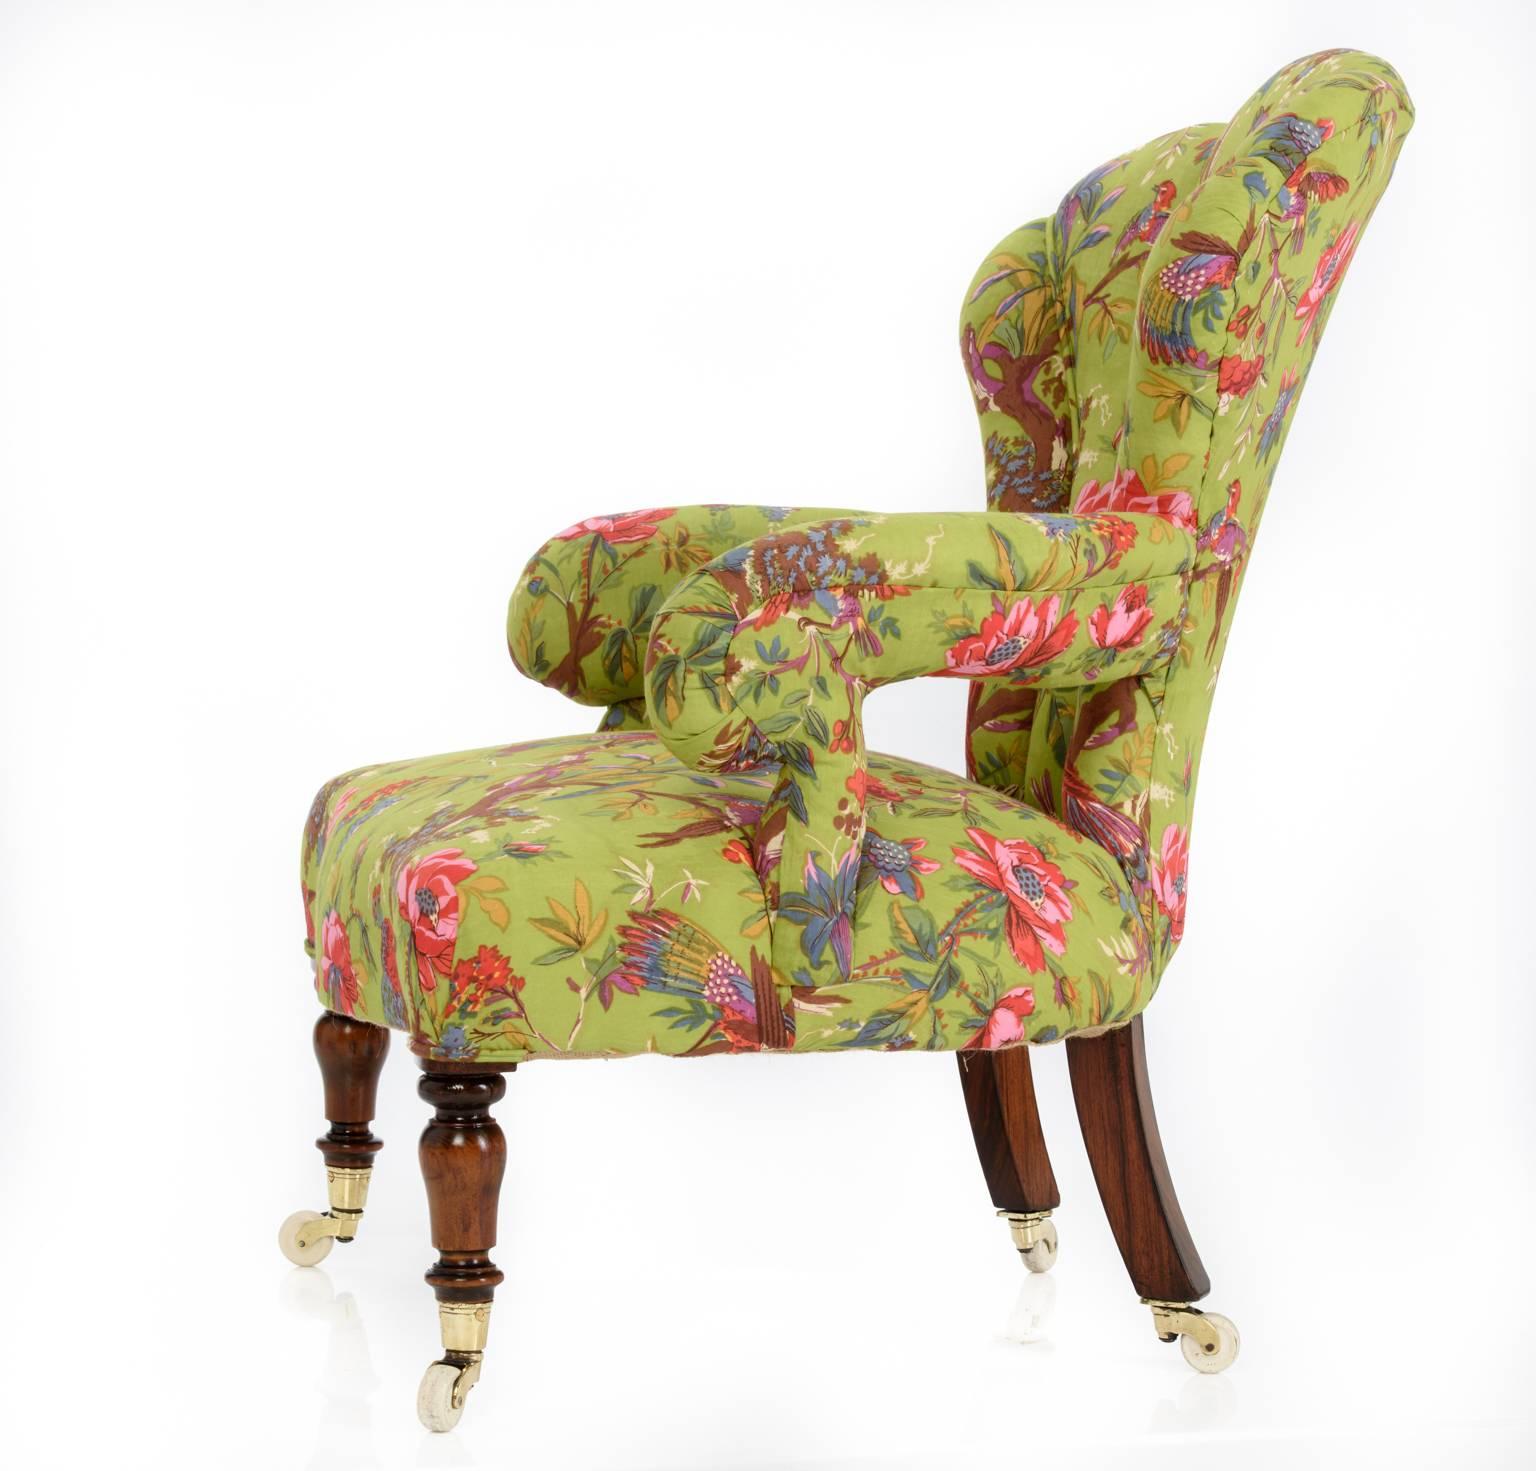 Simply stunning and unusual French iron framed, fan backed armchair, traditionally restored and reupholstered in a delicate hand blocked vivid lime parrot cotton, piped detail to front of legs, hand-sewn panel detail.

Resting on original turned